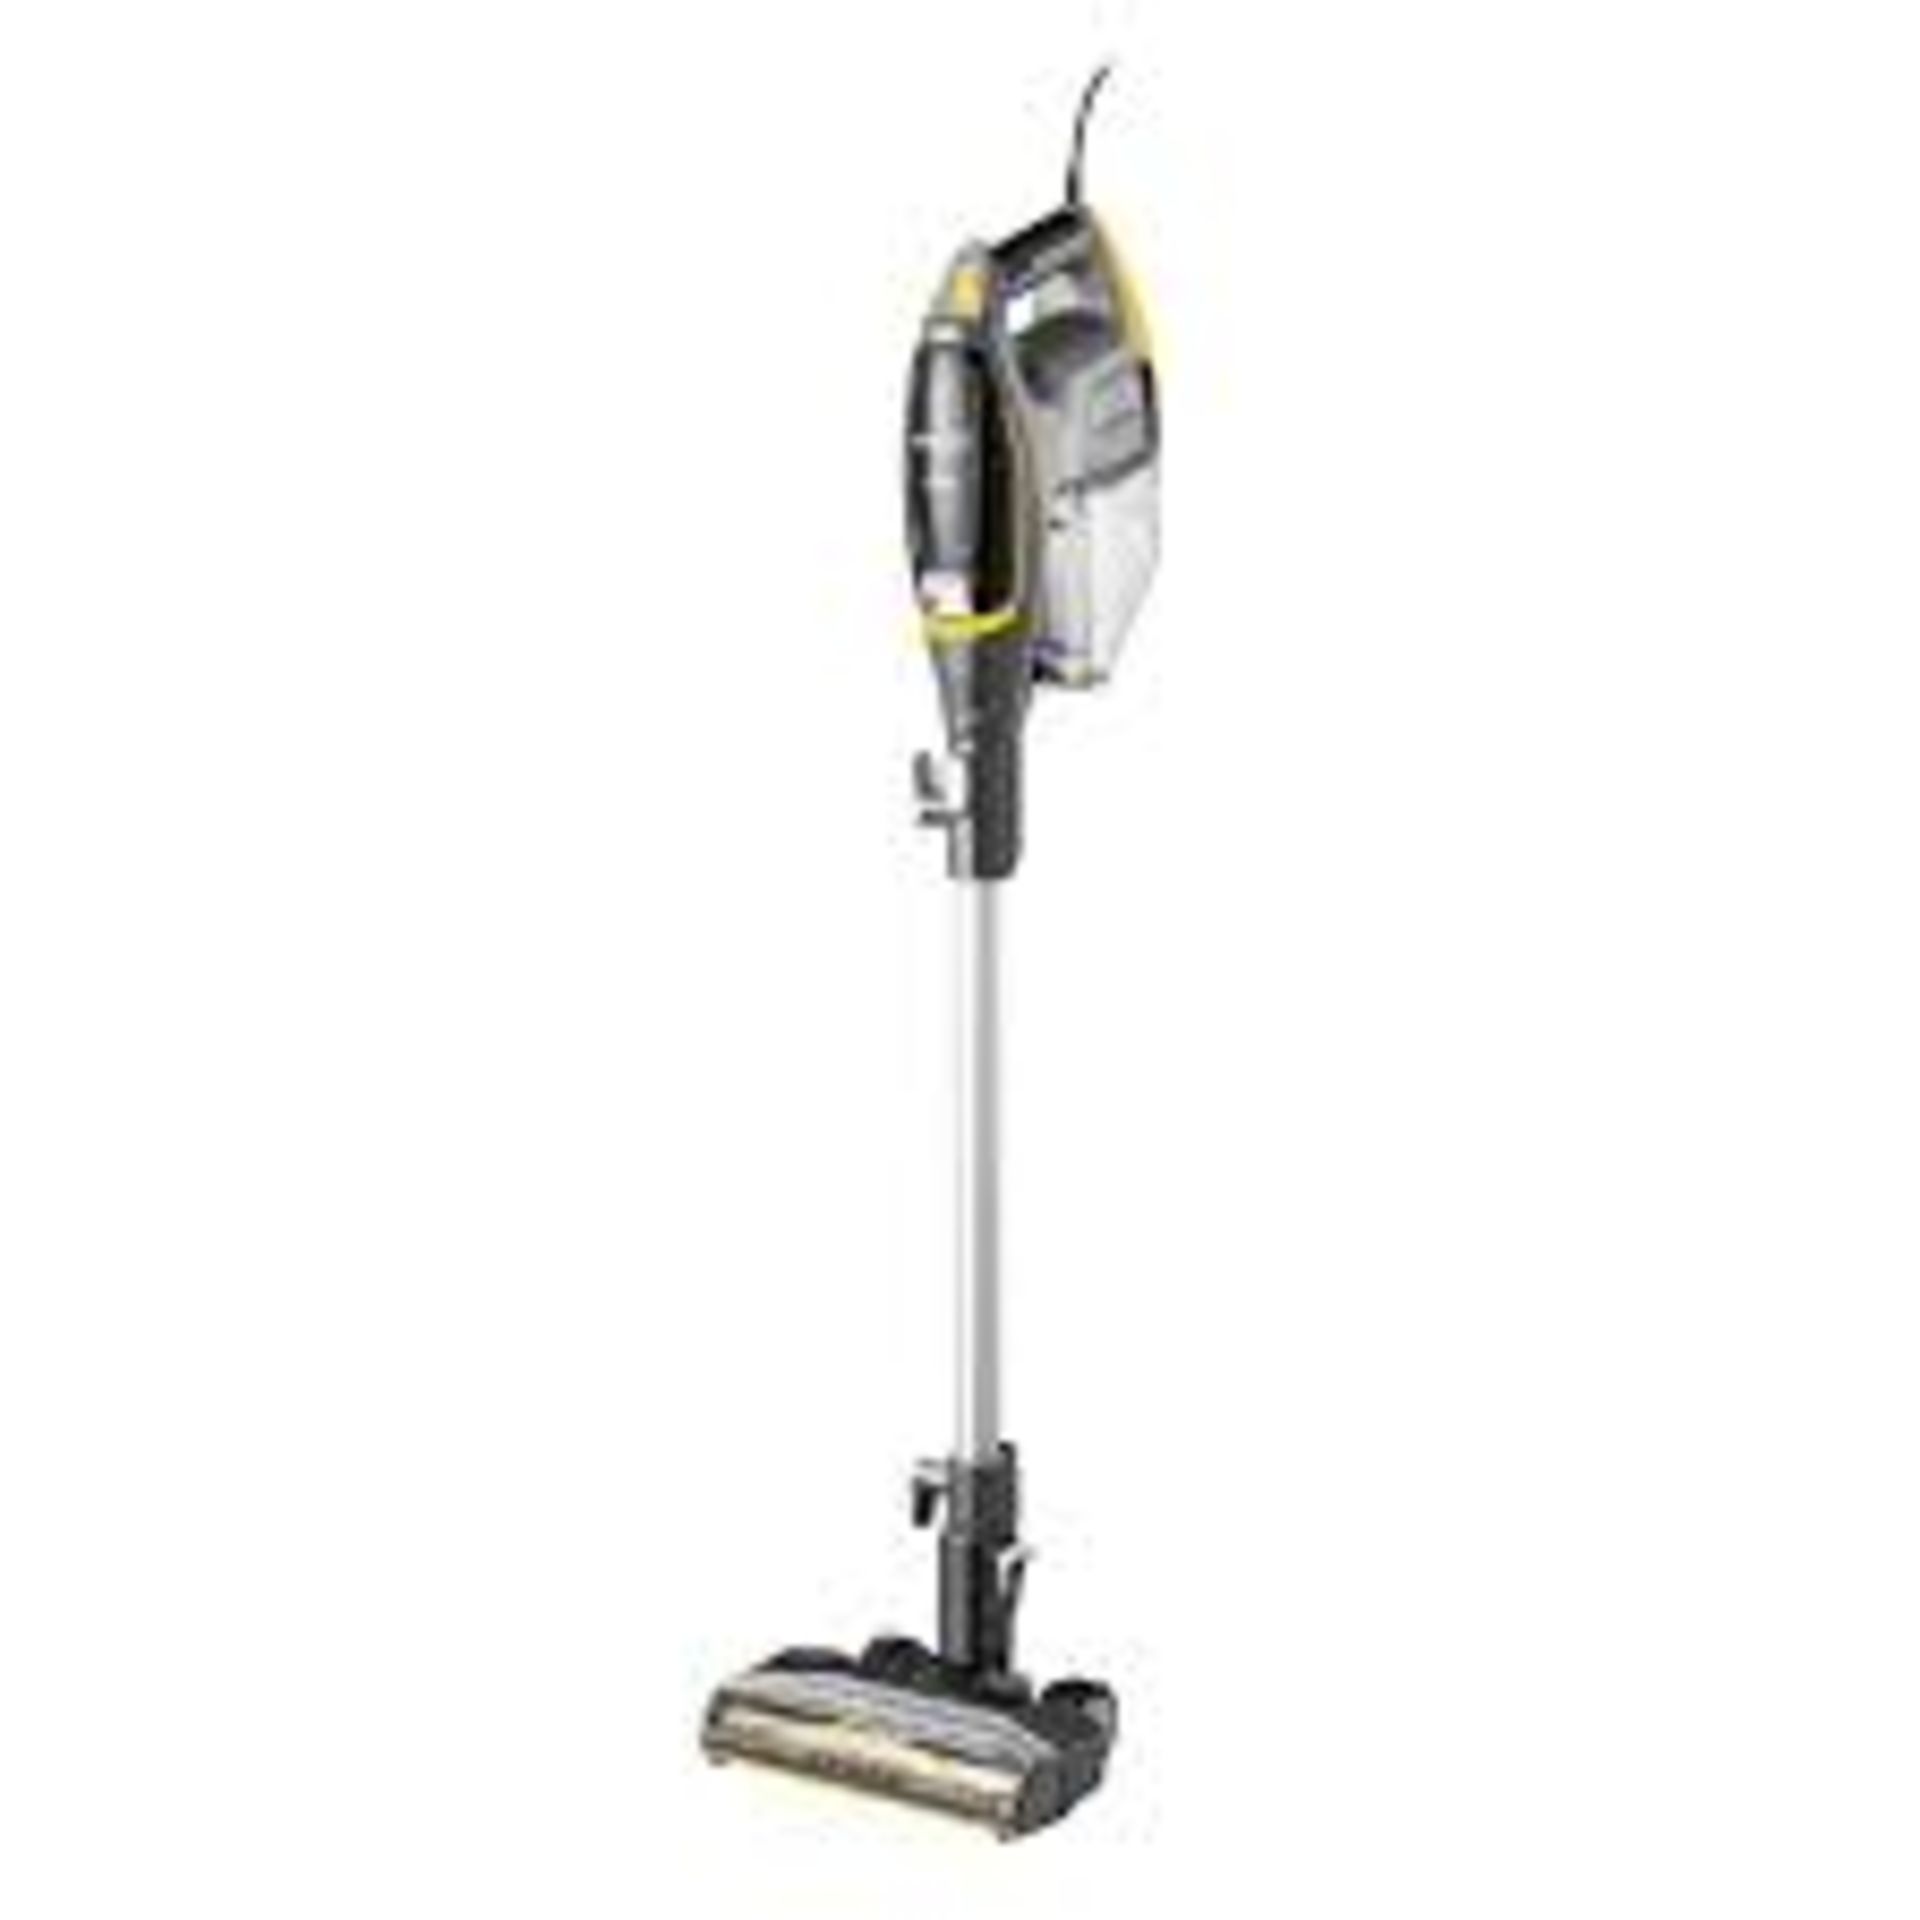 3 X BRAND NEW Eureka NES510 2-in-1 Corded Stick & Handheld Vacuum Cleaner, 400W Motor for Whole - Image 2 of 3